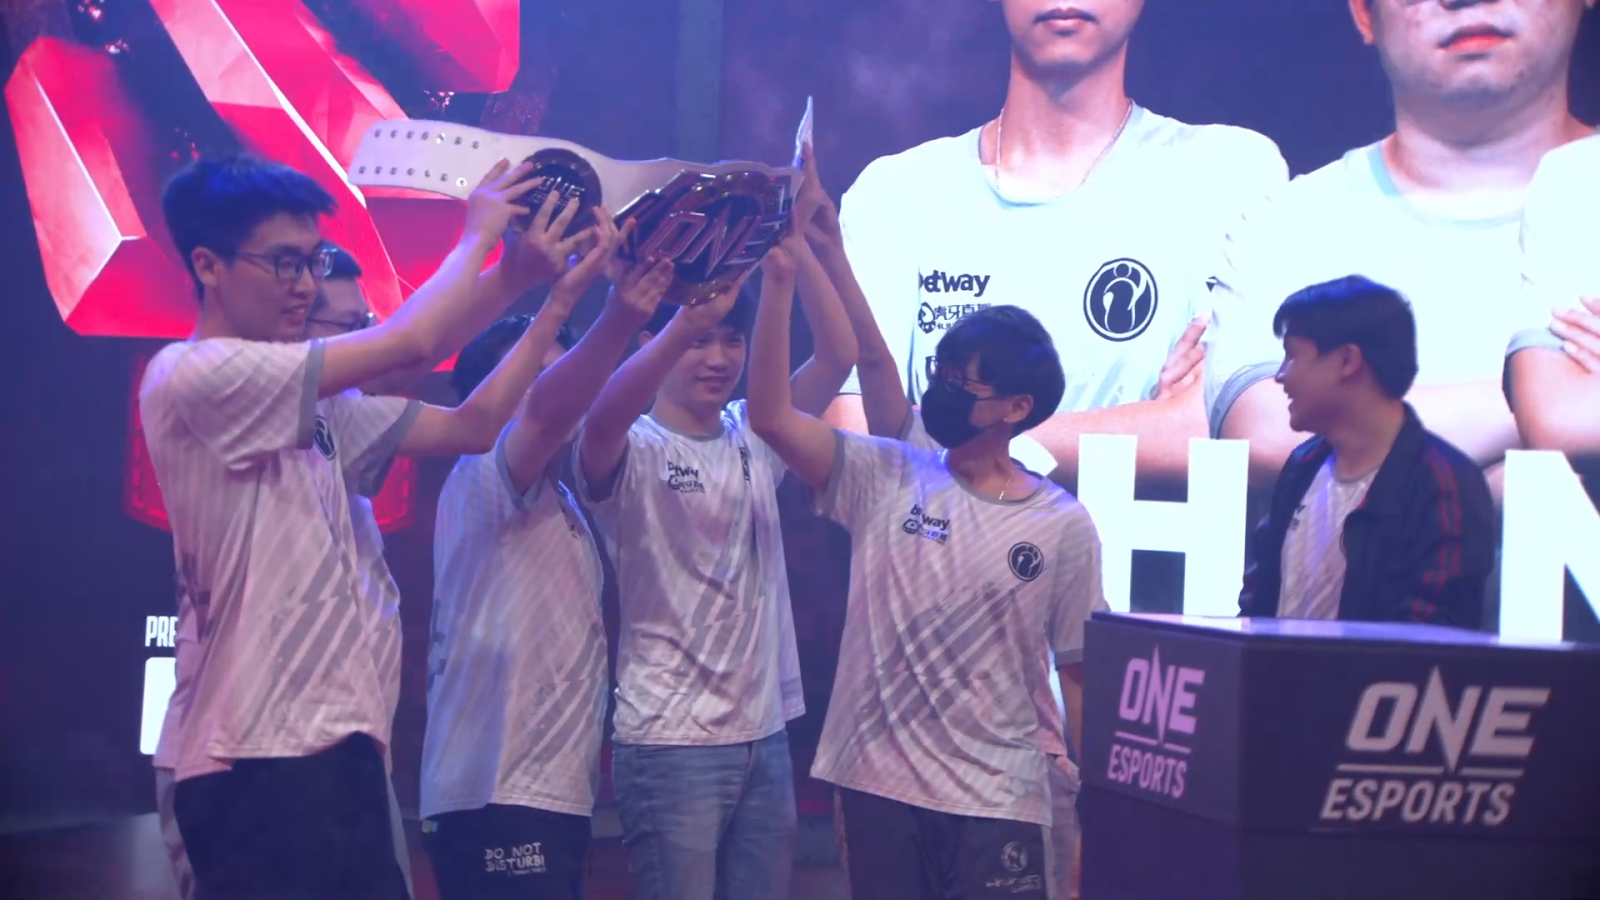 The IG roster picks up the Singapore Major 2021 winning trophy